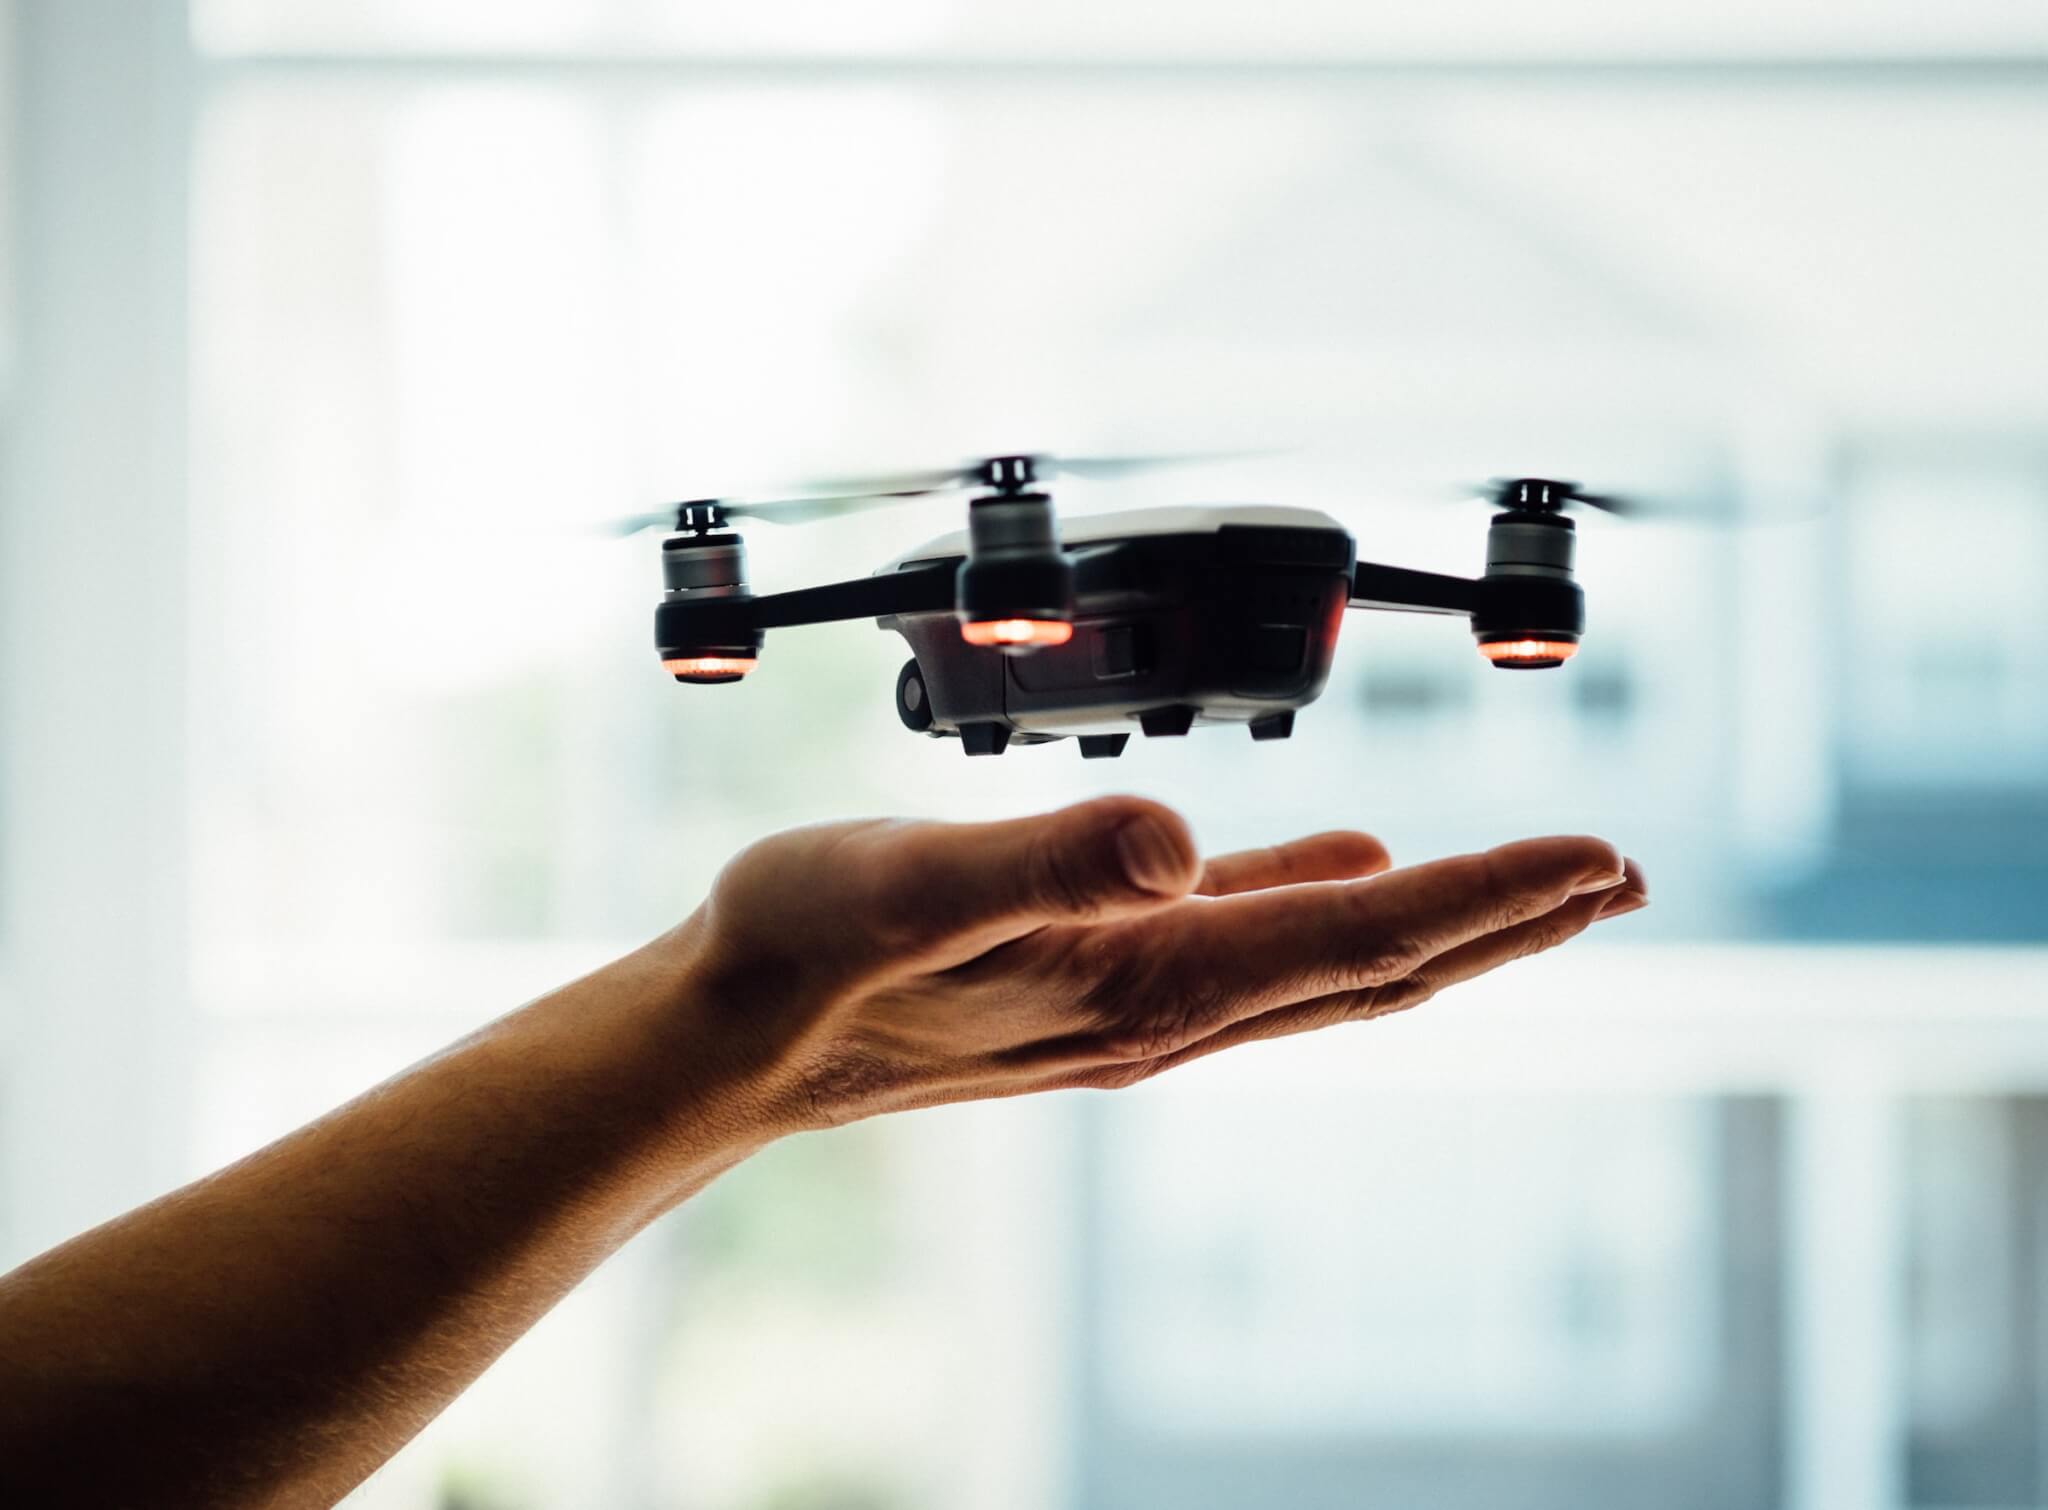 Best Drones For 2023: Top 5 Models Most Recommended By Experts - Study Finds